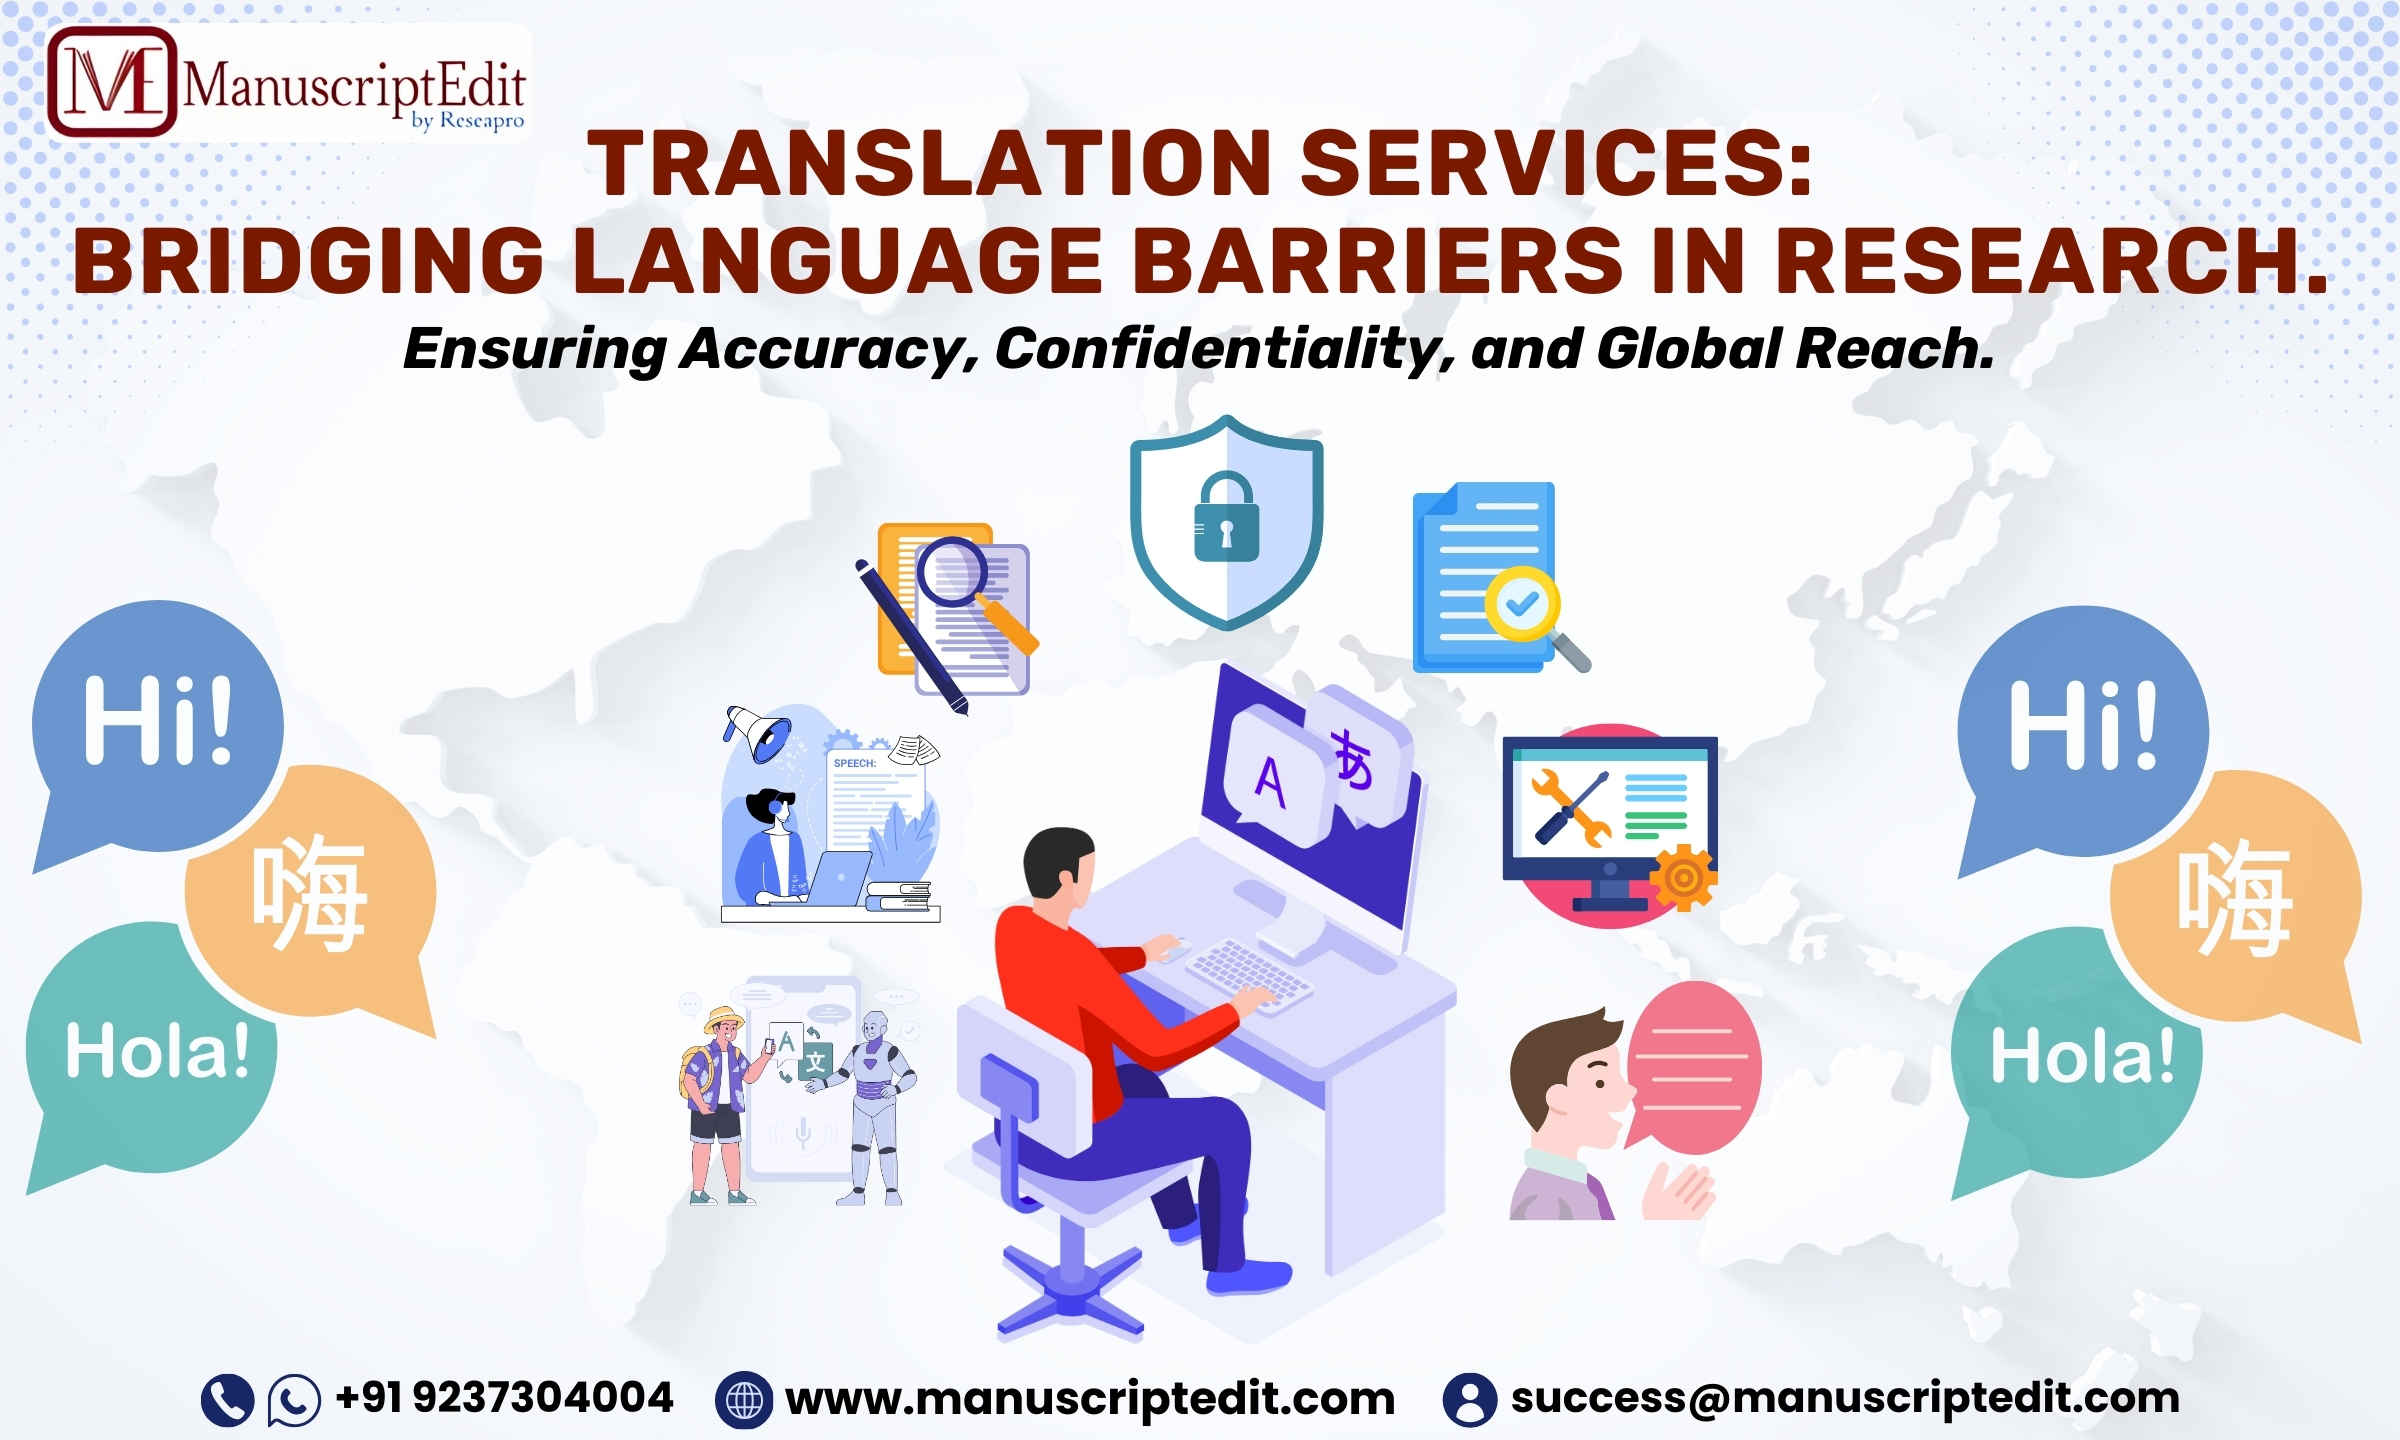 Translation Services: Bridging Language Barriers in Research